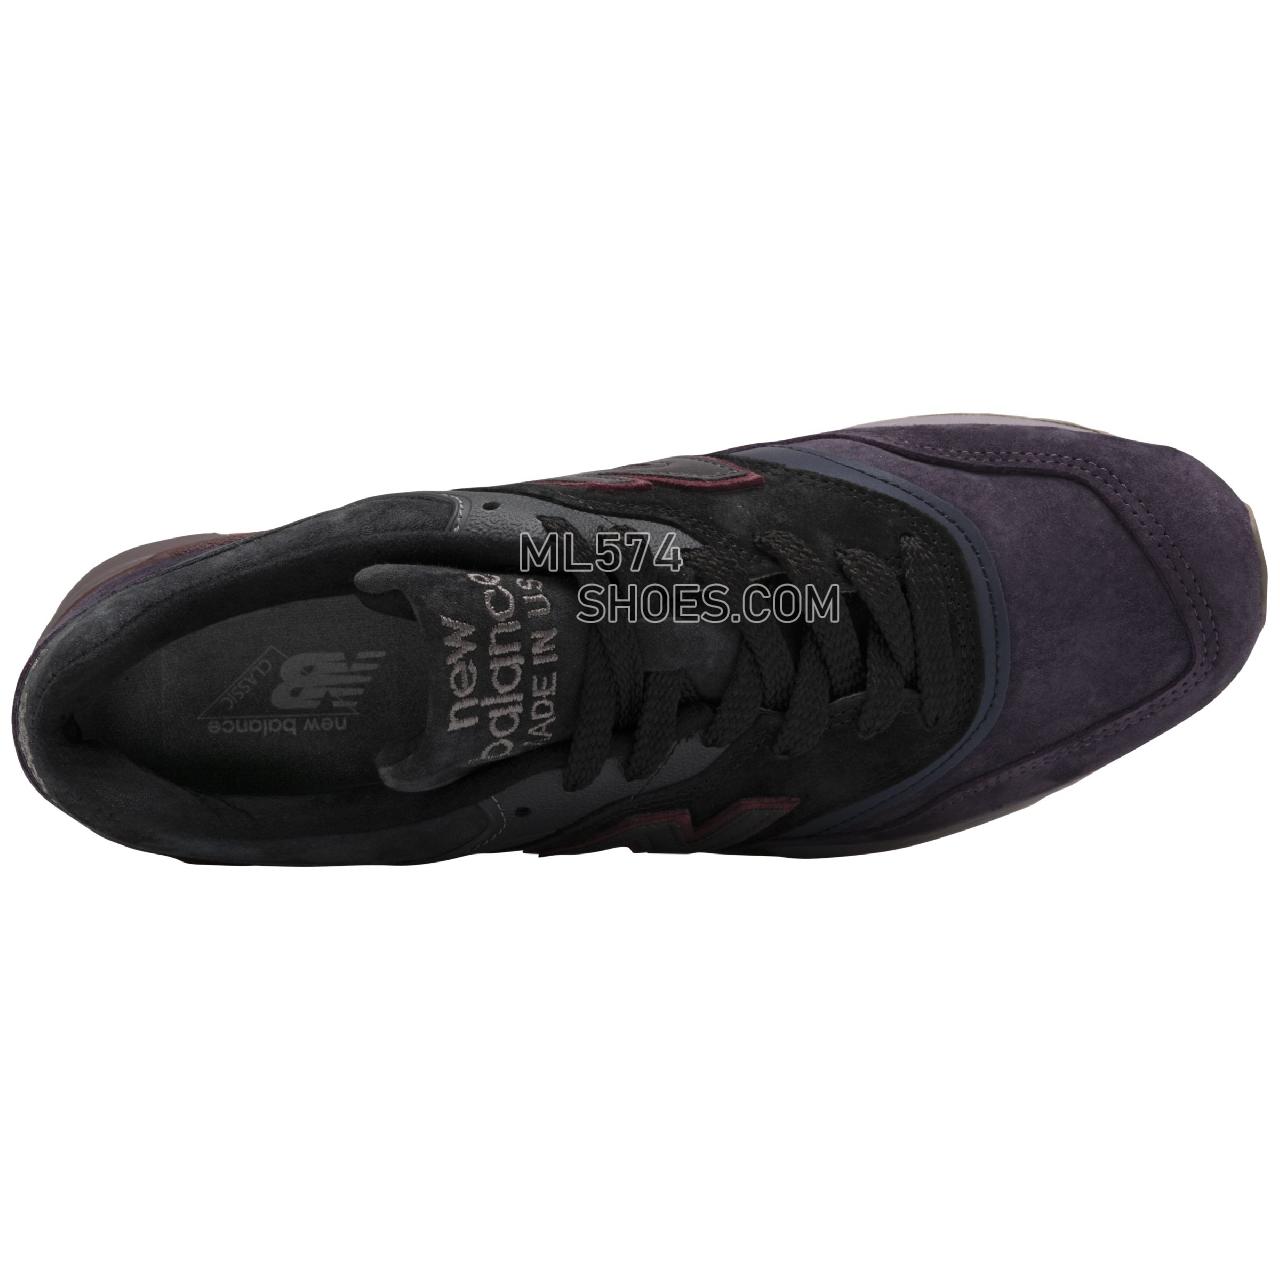 New Balance Made in US 997 - Men's Made in US 997 Classic - Black with Pigment - M997NAK